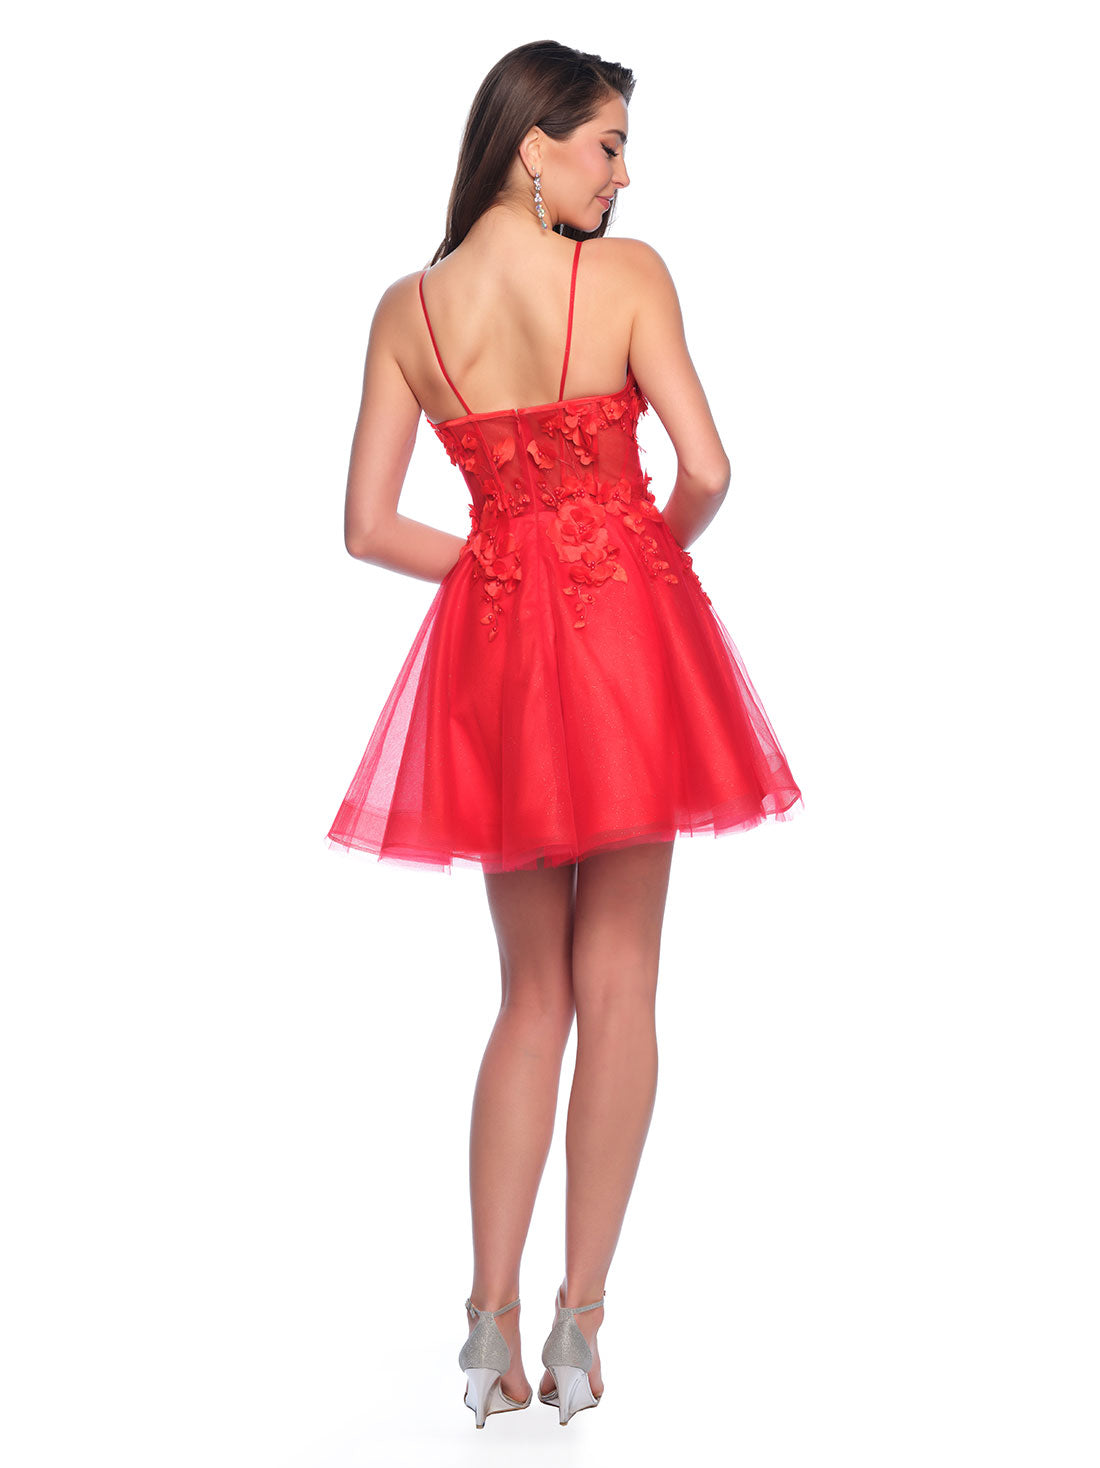 3D SWEETHEART BODICE DRESS WITH TULLE SKIRT